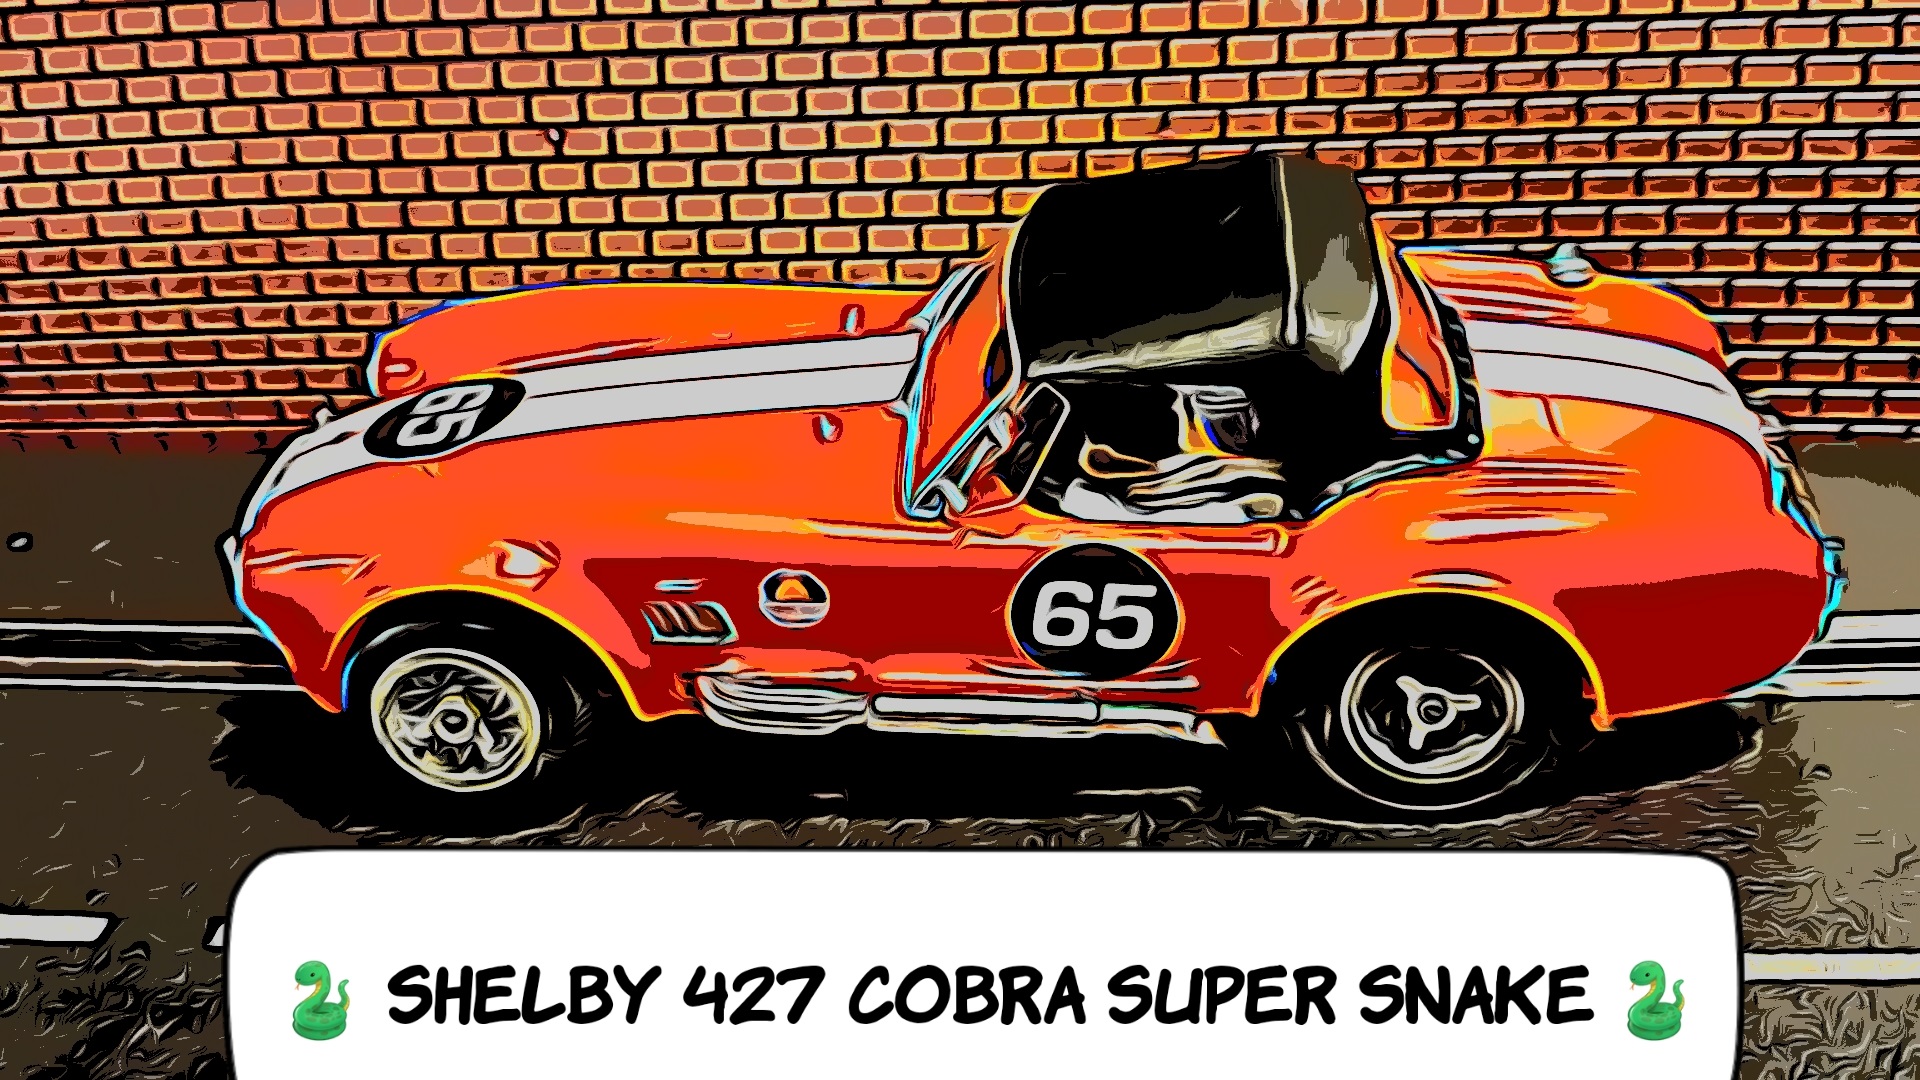 * SOLD * * SALE * COX Shelby Cobra 427 🐍 Slot Car 1:24 Scale Car 65 in Red with Dual Racing Stripes